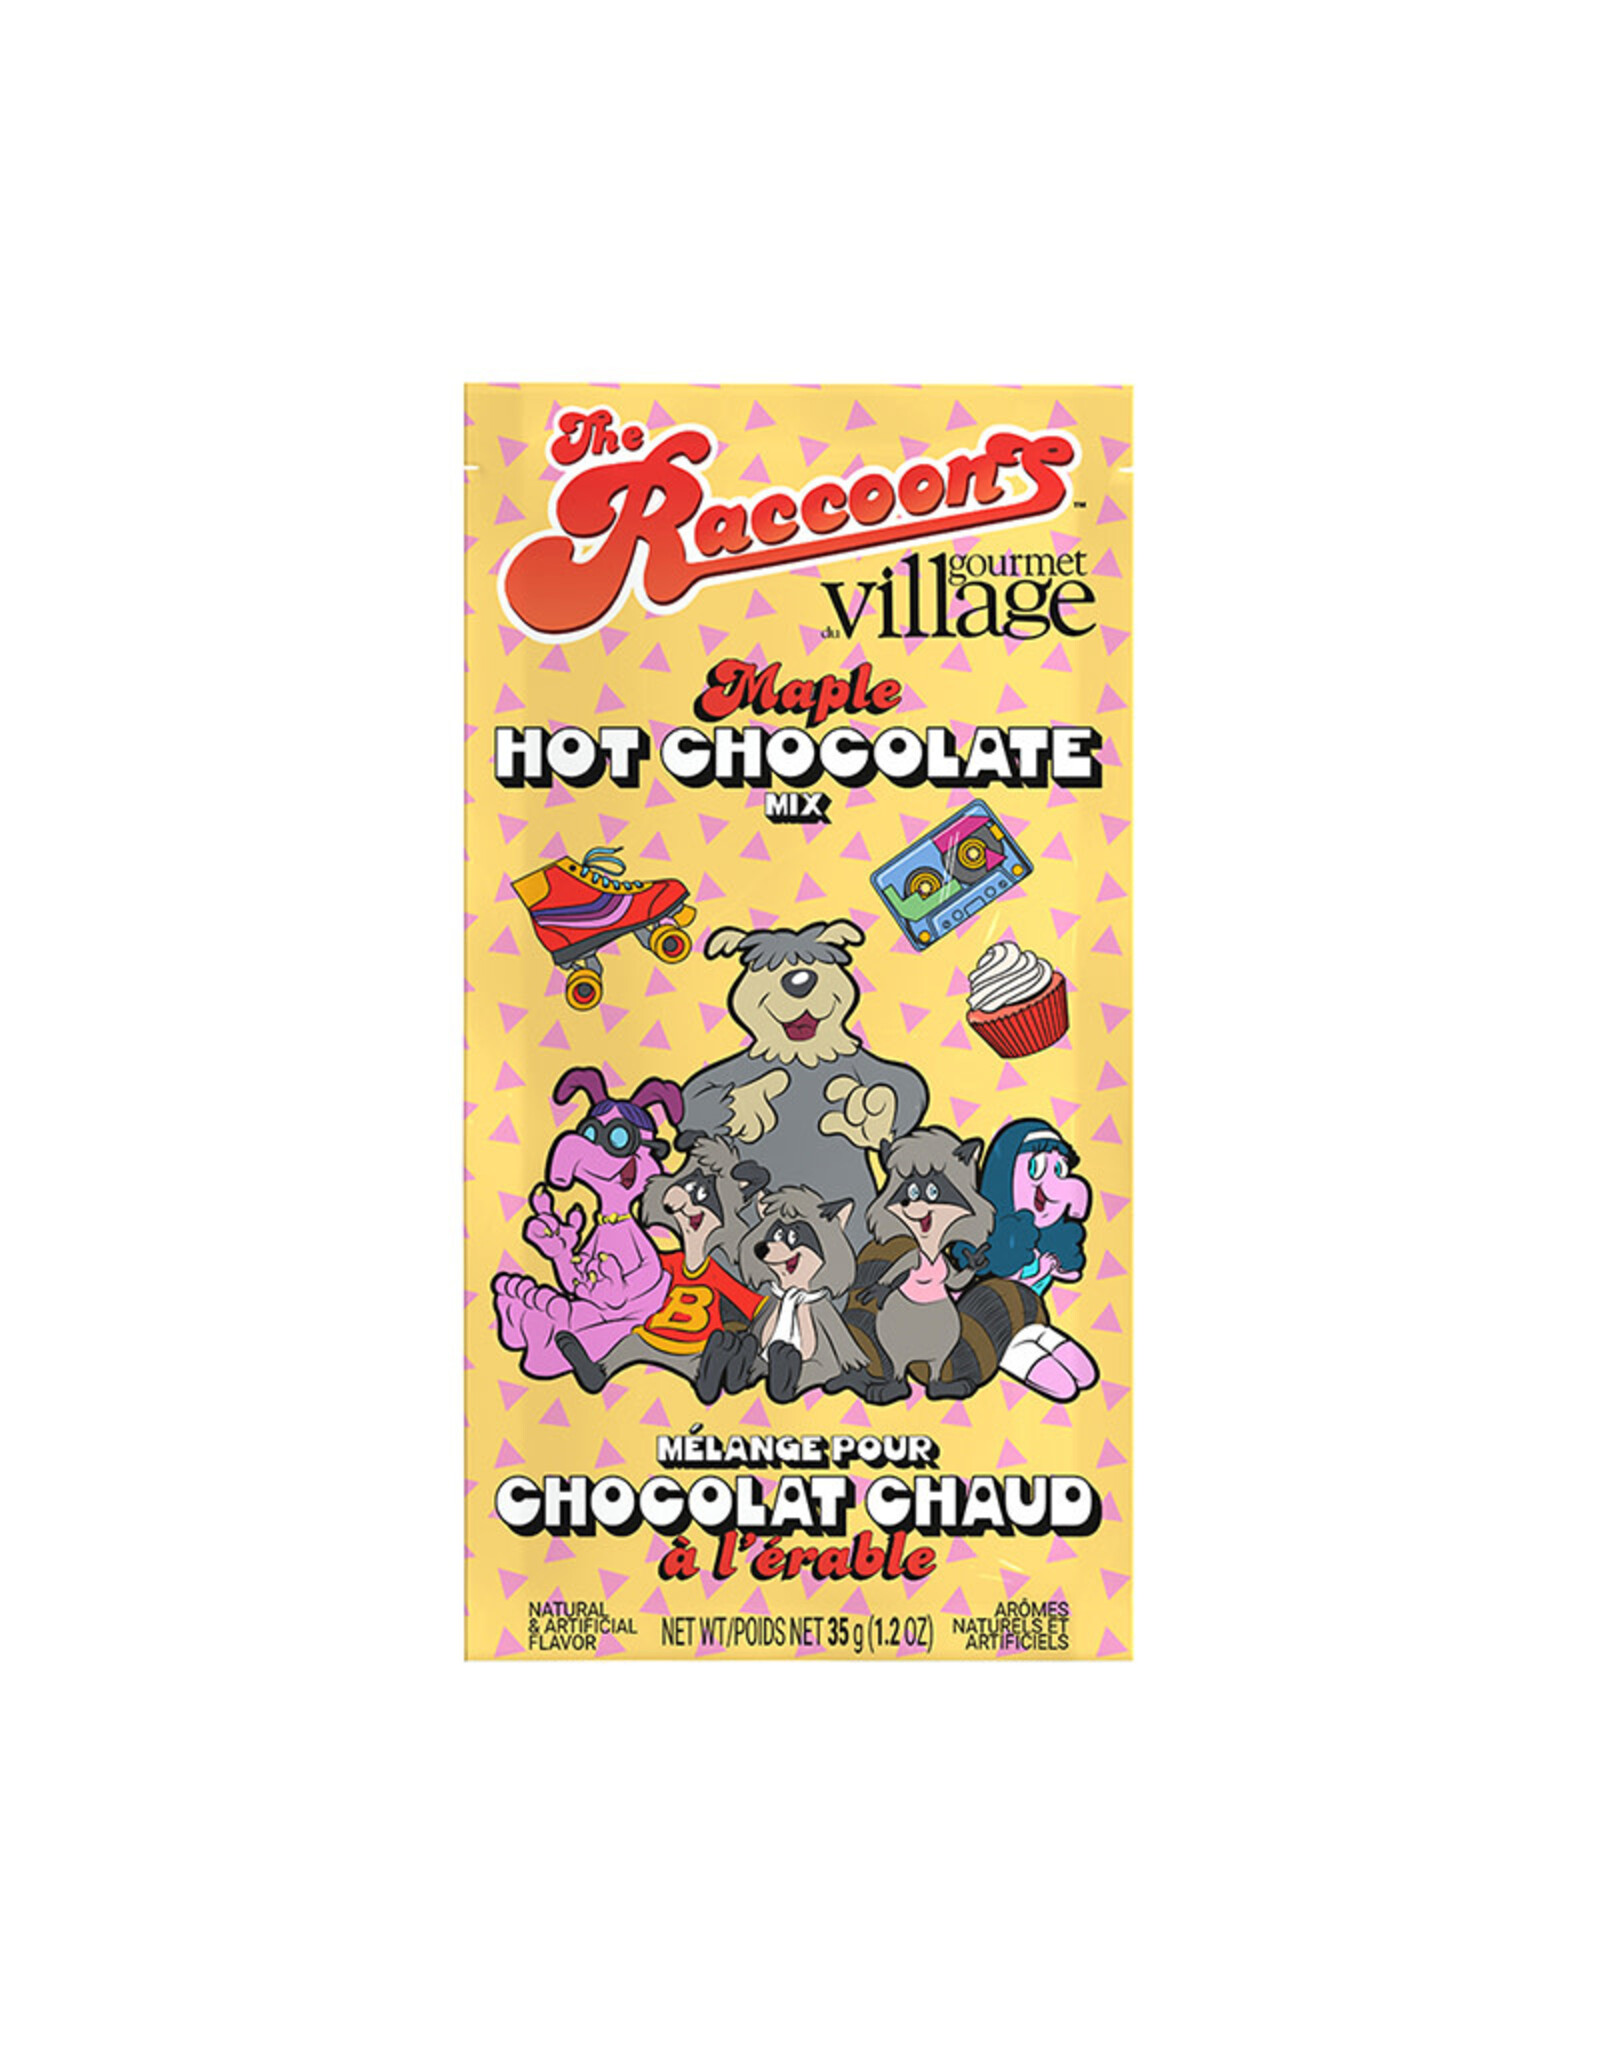 Gourmet Village Raccoons “The Gang” Maple Hot Chocolate